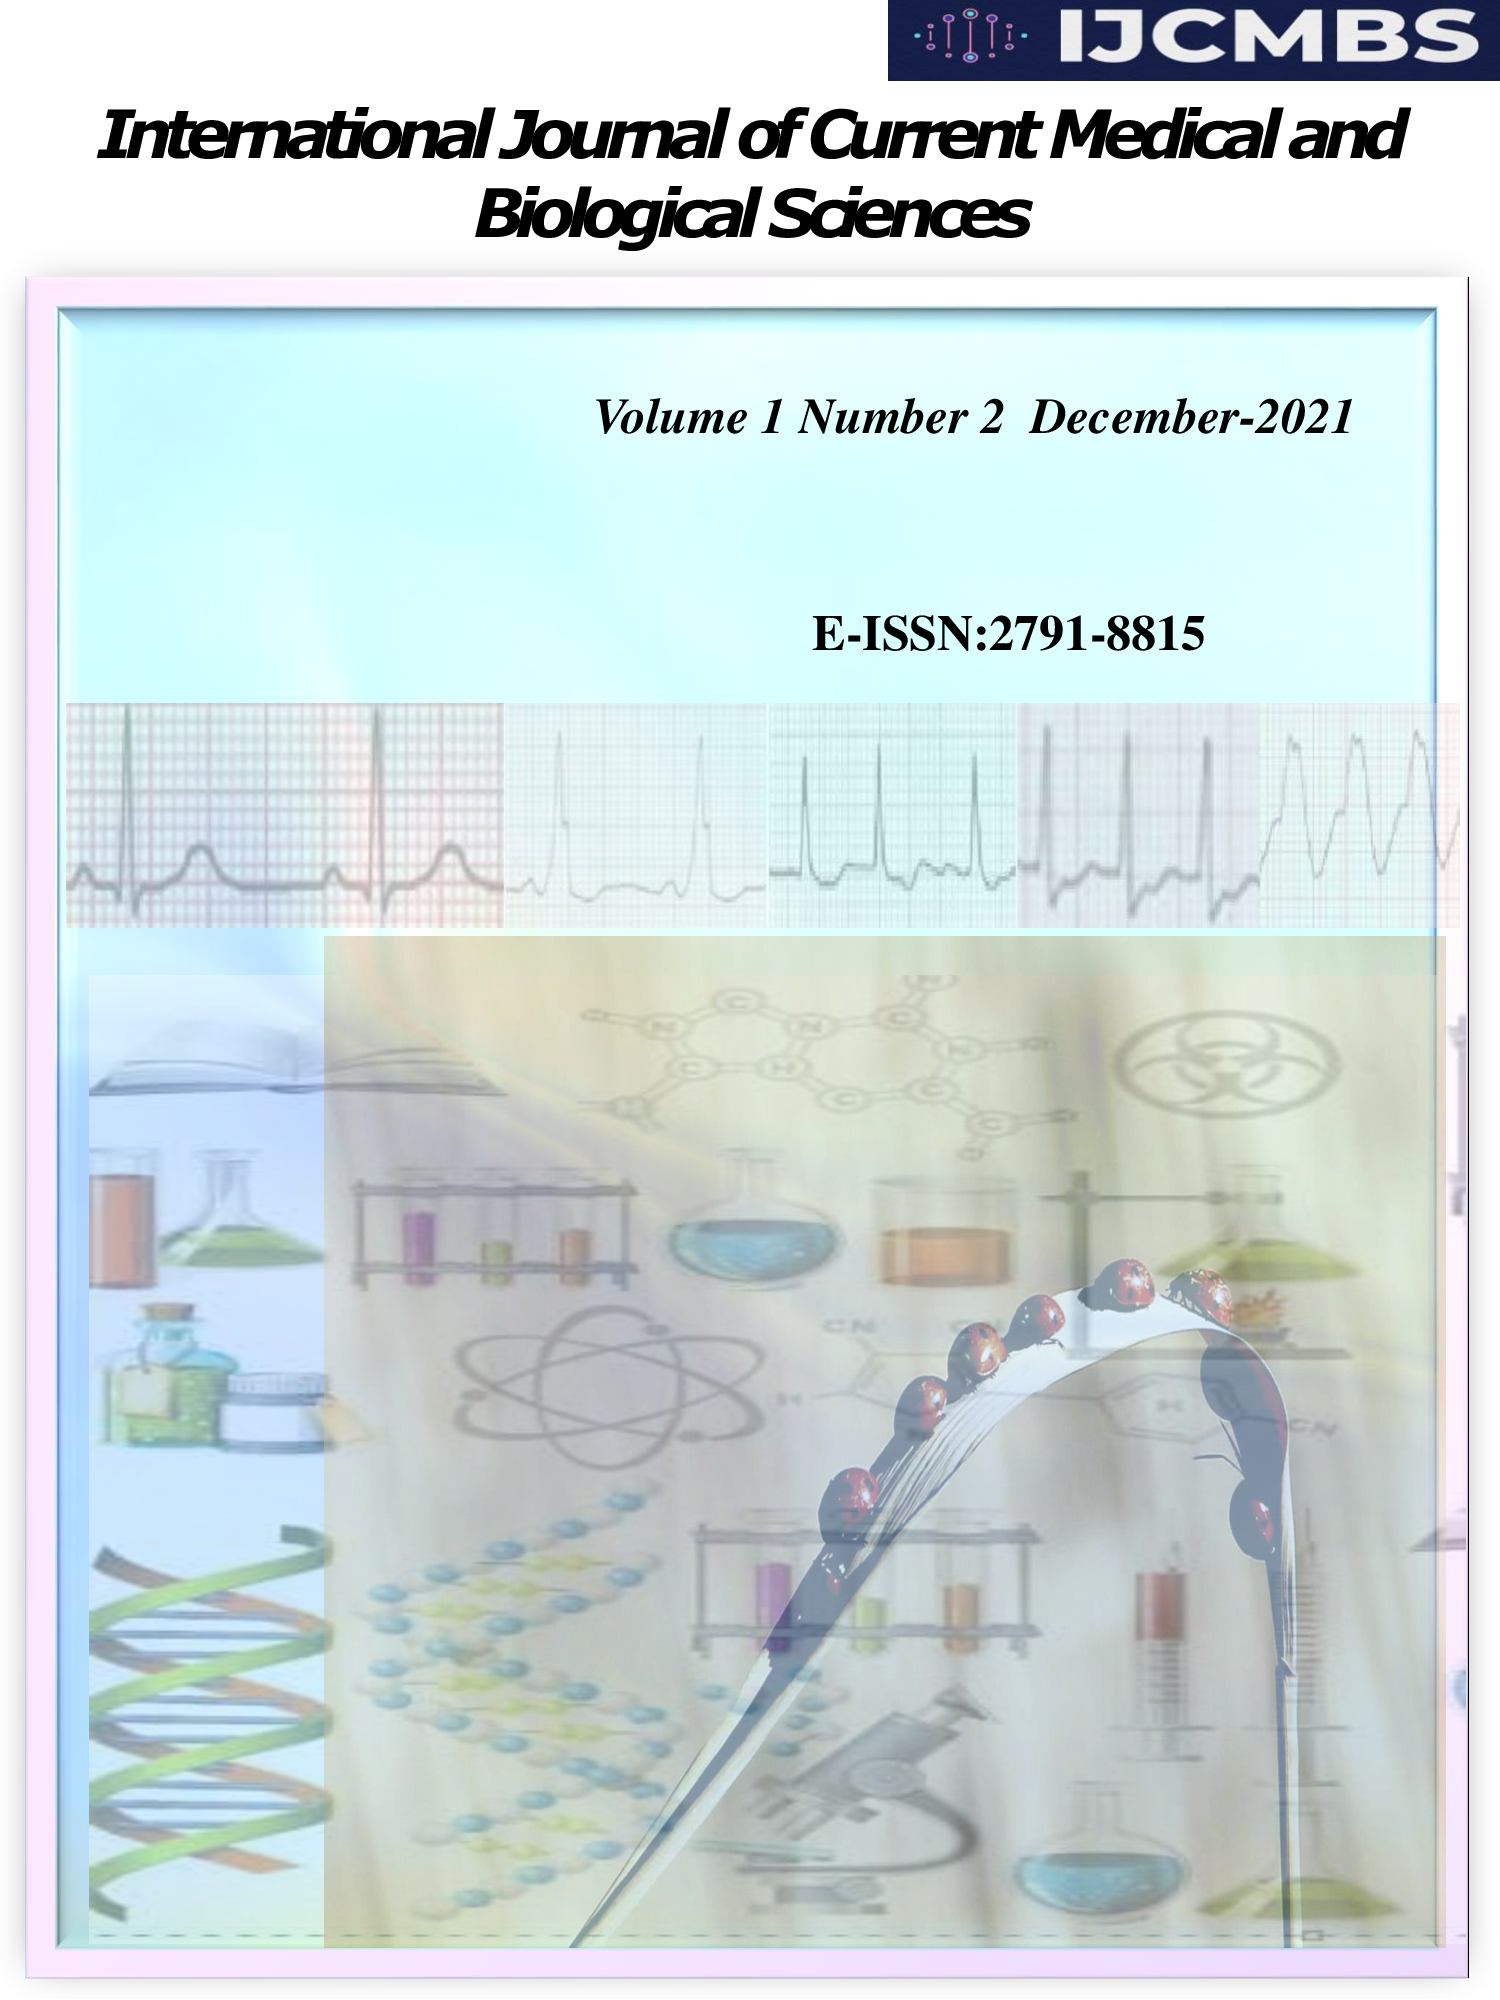 					View Vol. 1 No. 2 (2021): International Journal of Current Medical and Biological Sciences
				